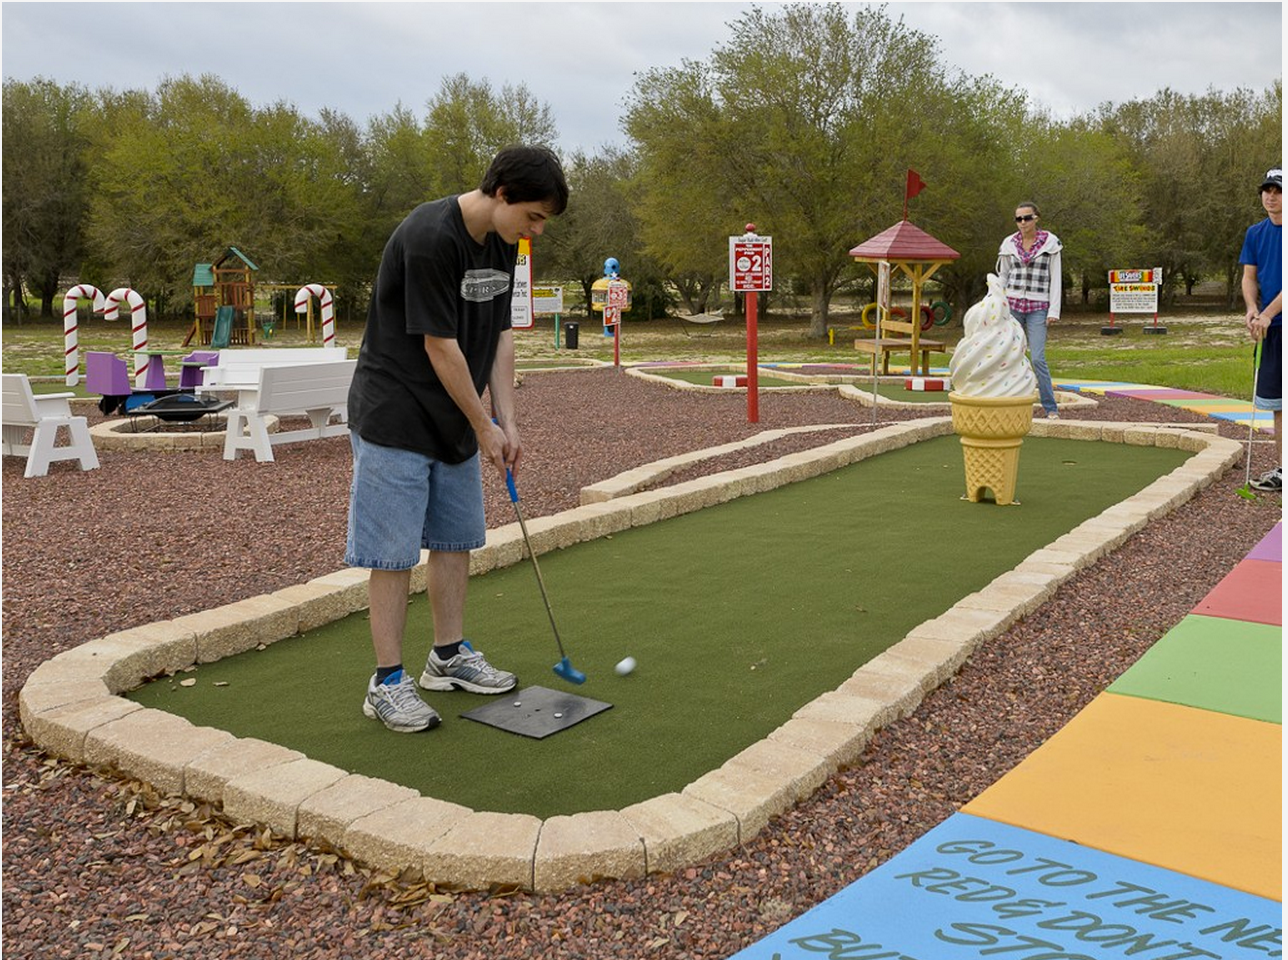 Homeaway rental with private mini golf and amusement park